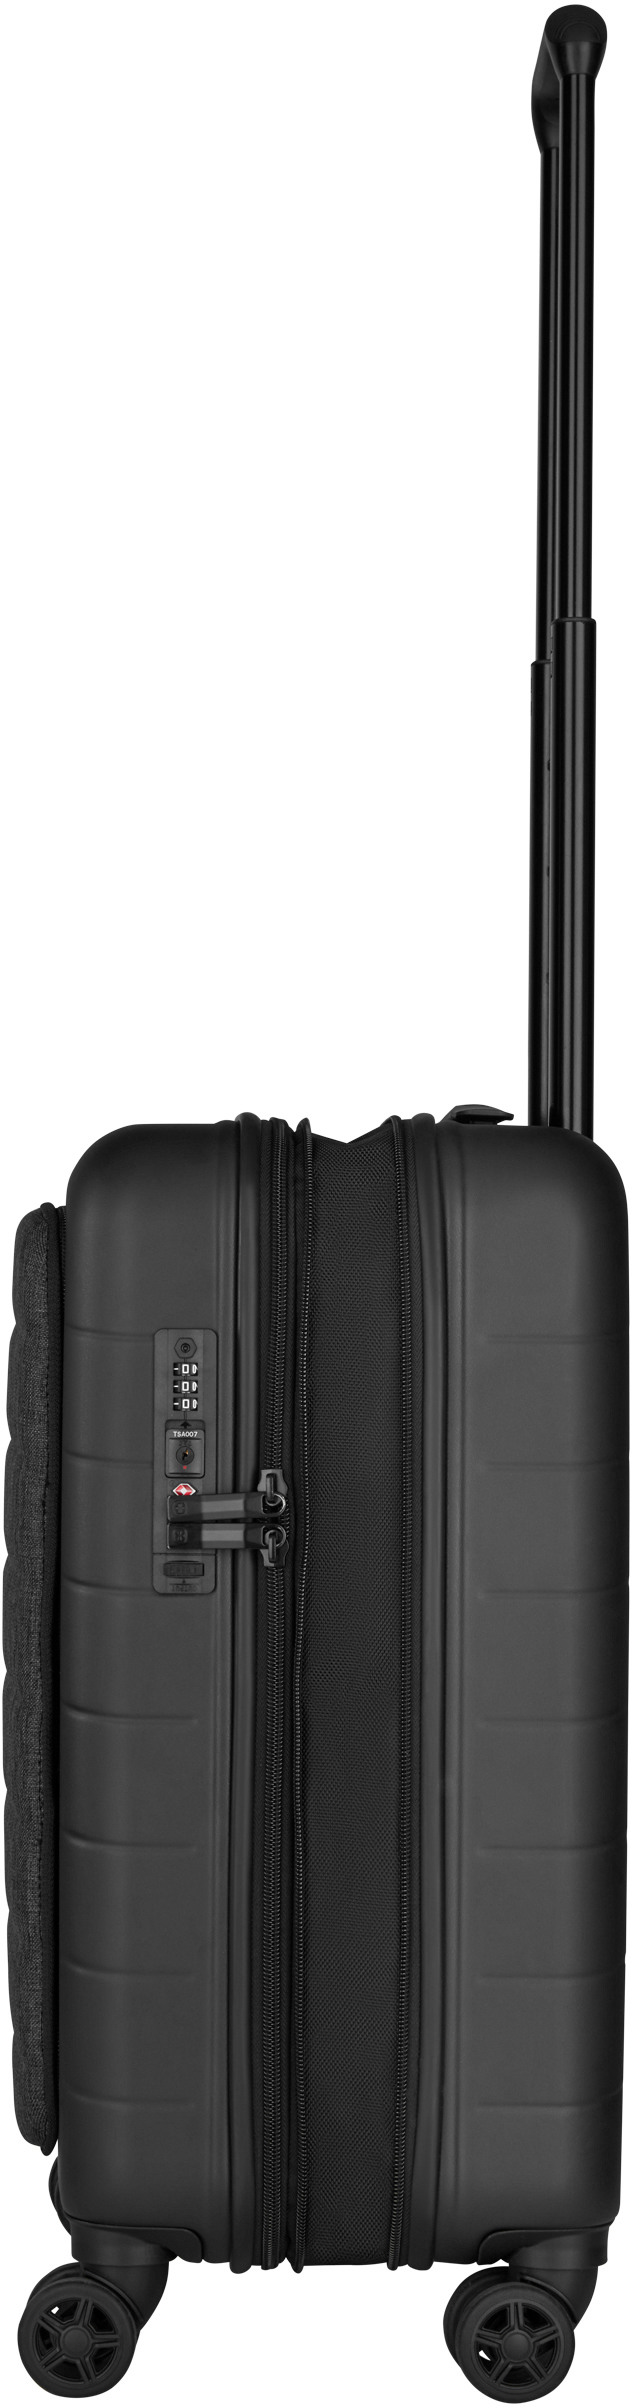 WENGER Syntry Carry-on 44L 610163 black/grey